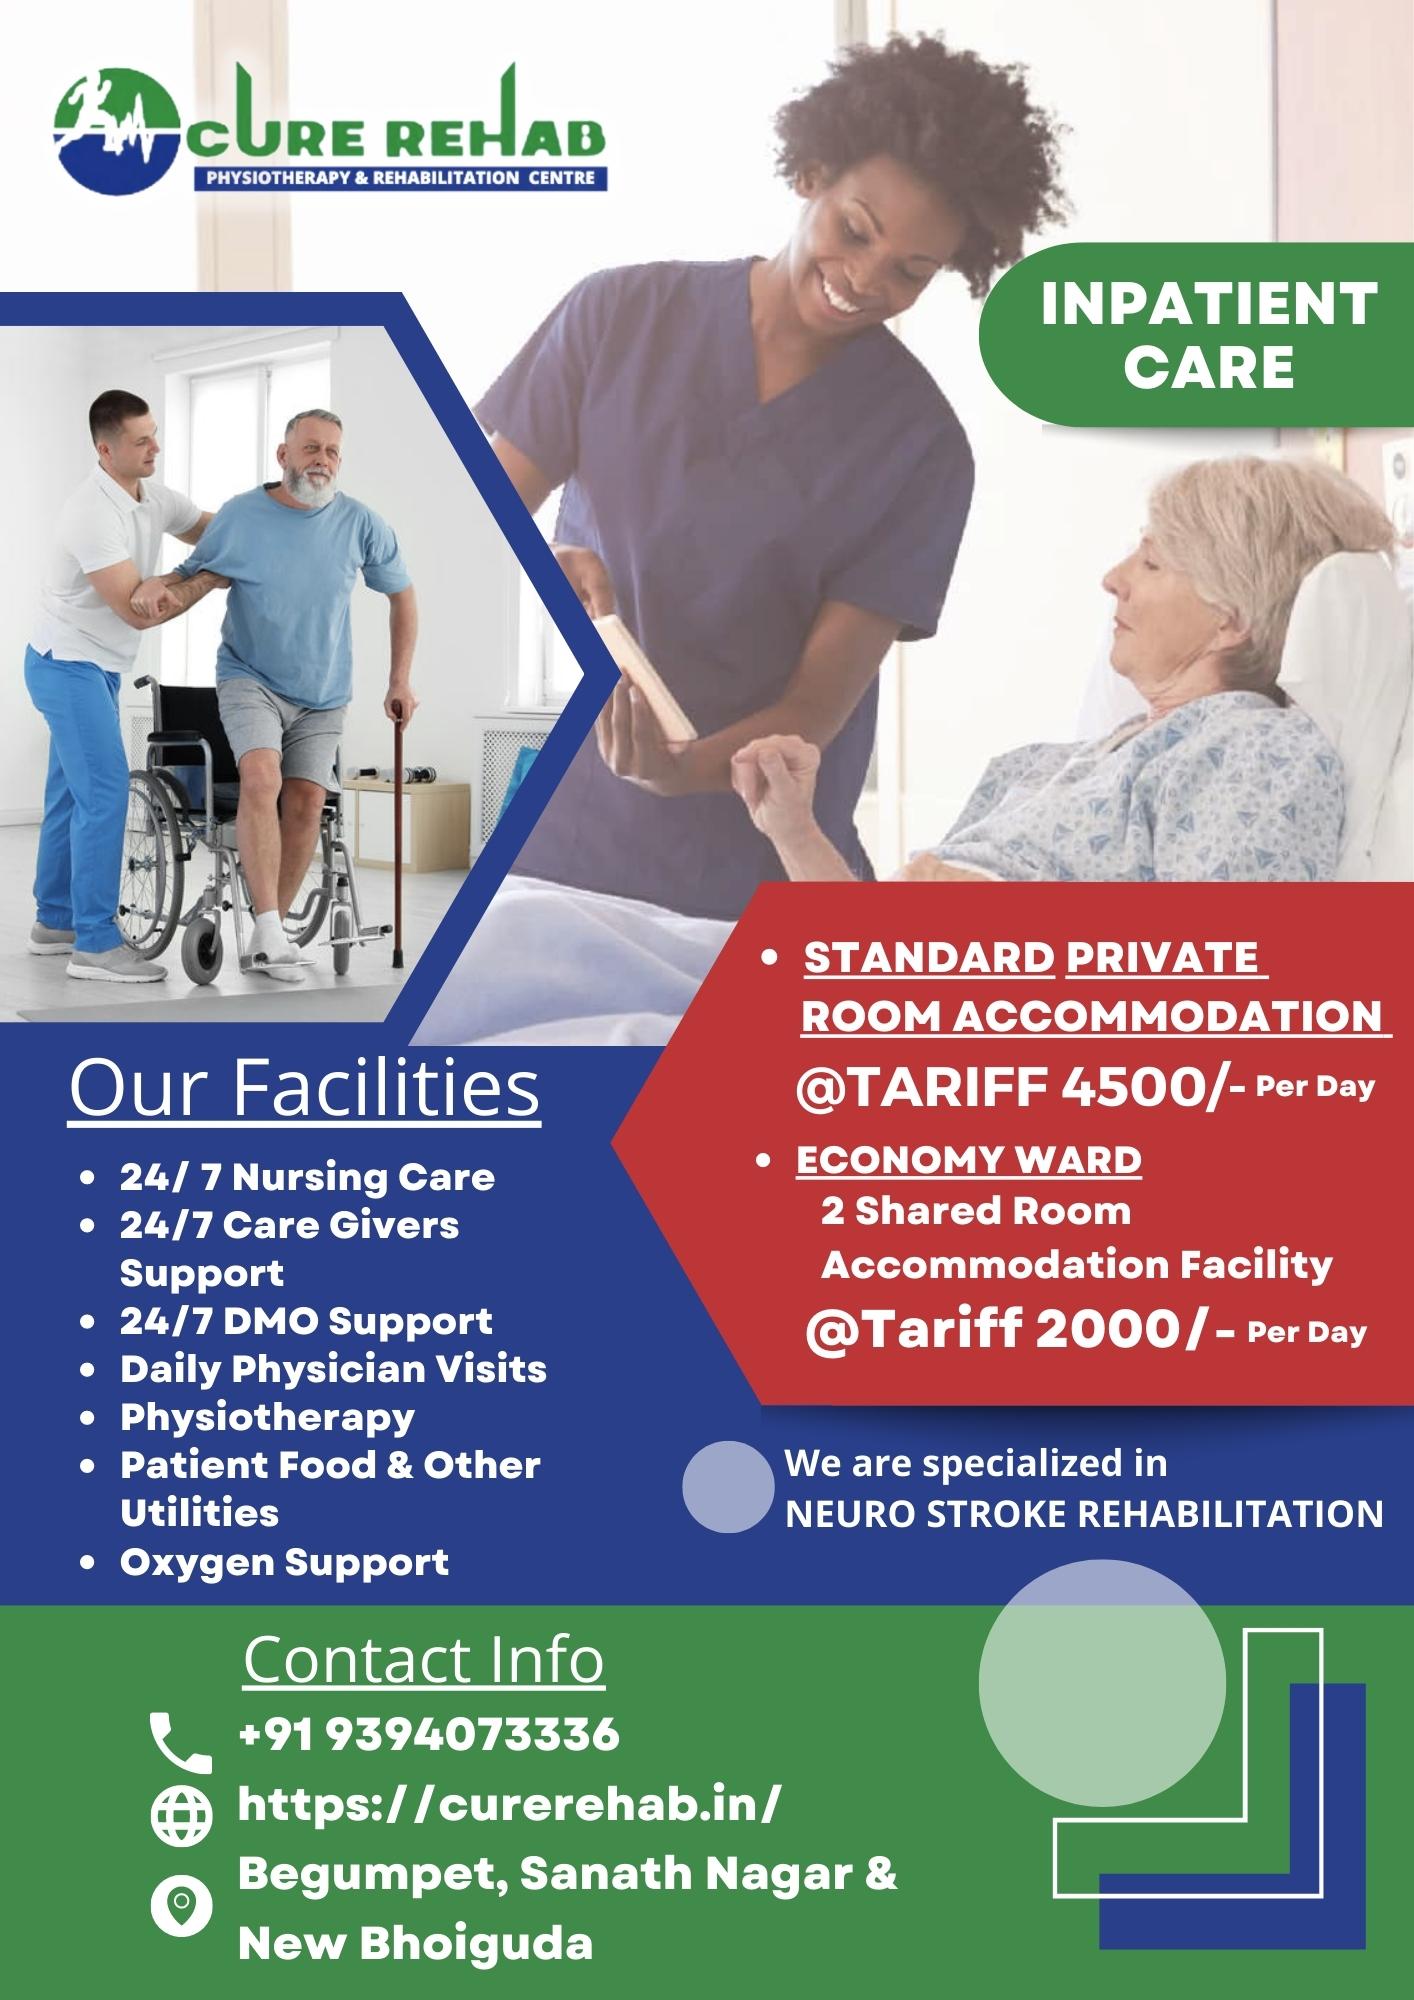 Cure Rehab Physiotherapy Centre | Best Outpatient Physiotherapy Services In Hyderabad  | Best Rehabilitation Services and Transitional Care in Hyderabad, Hyderabad, Andhra Pradesh, India